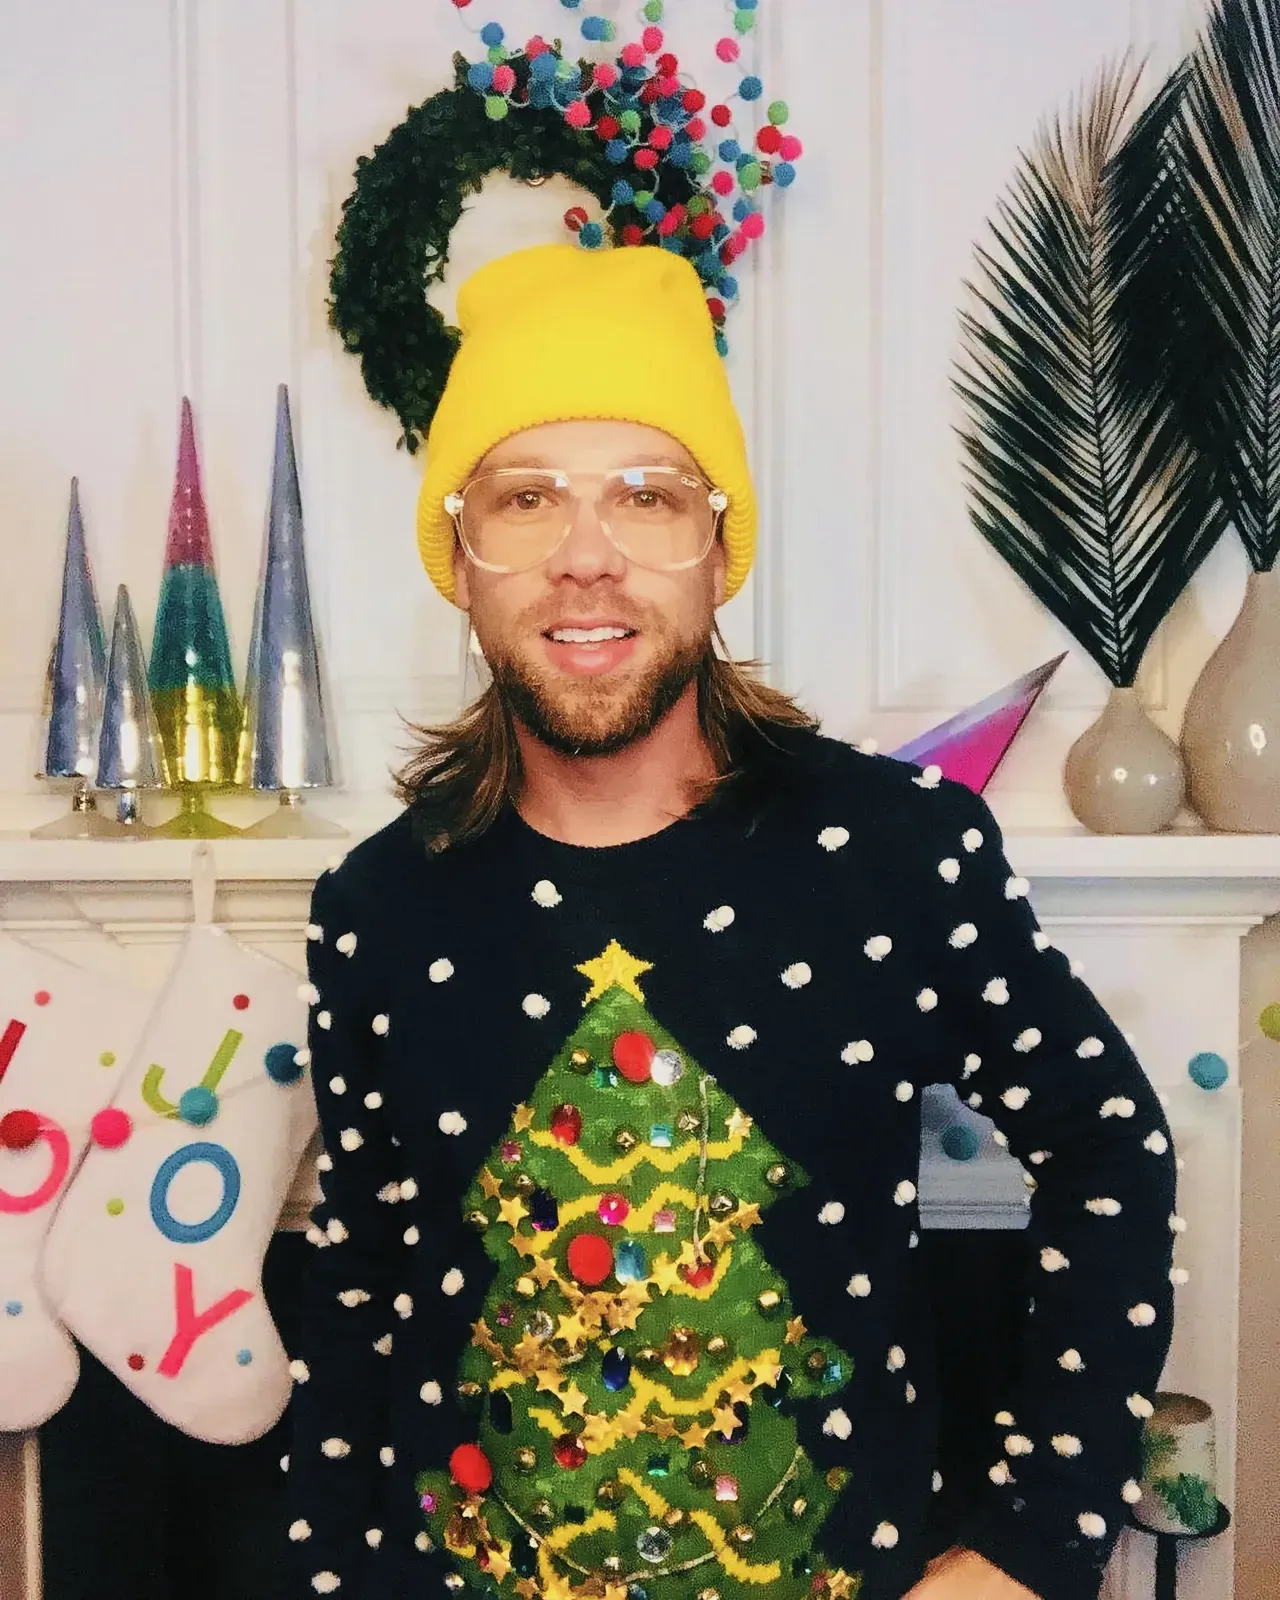 The Ugly Christmas Sweater Phenomenon: A man wearing a vibrant yellow hat and glasses, smiling in front of a Christmas tree with a DIY sweater.